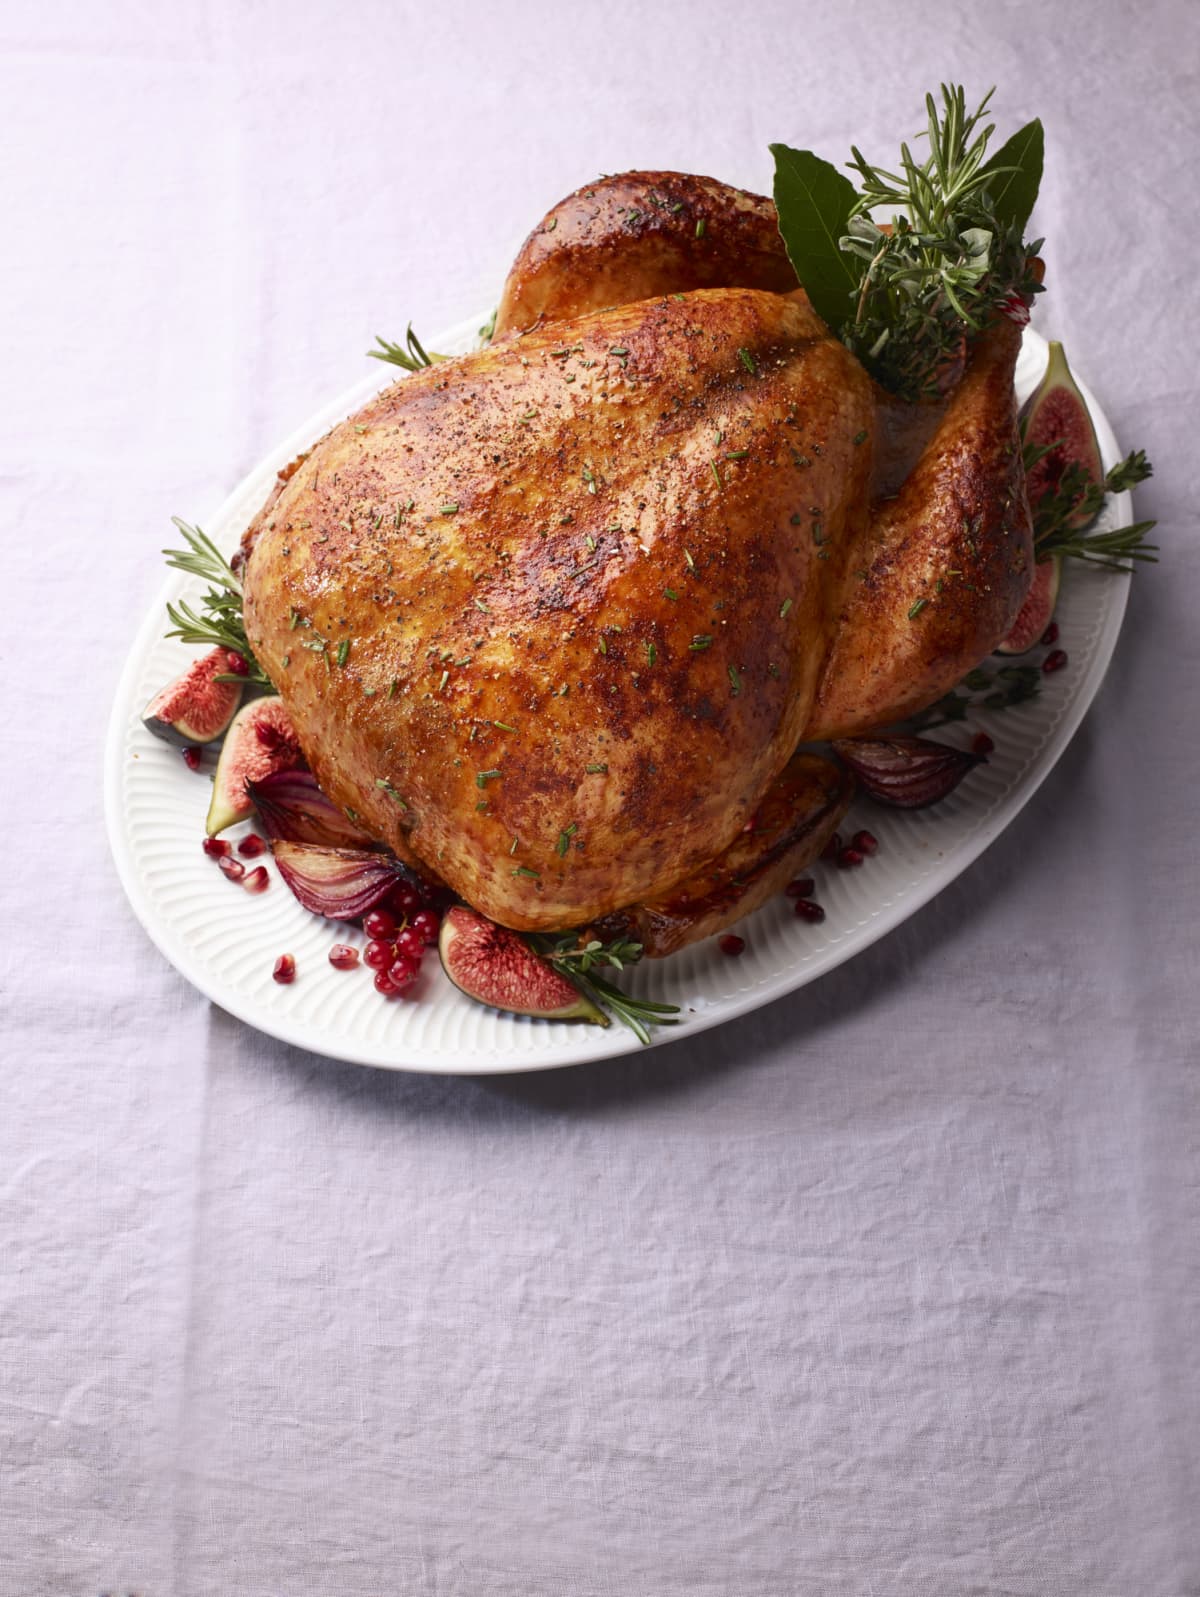 Roasted Thanksgiving Day Turkey on the holiday table. (Photo by: Anjelika Gretskaia/REDA&CO/Universal Images Group via Getty Images)